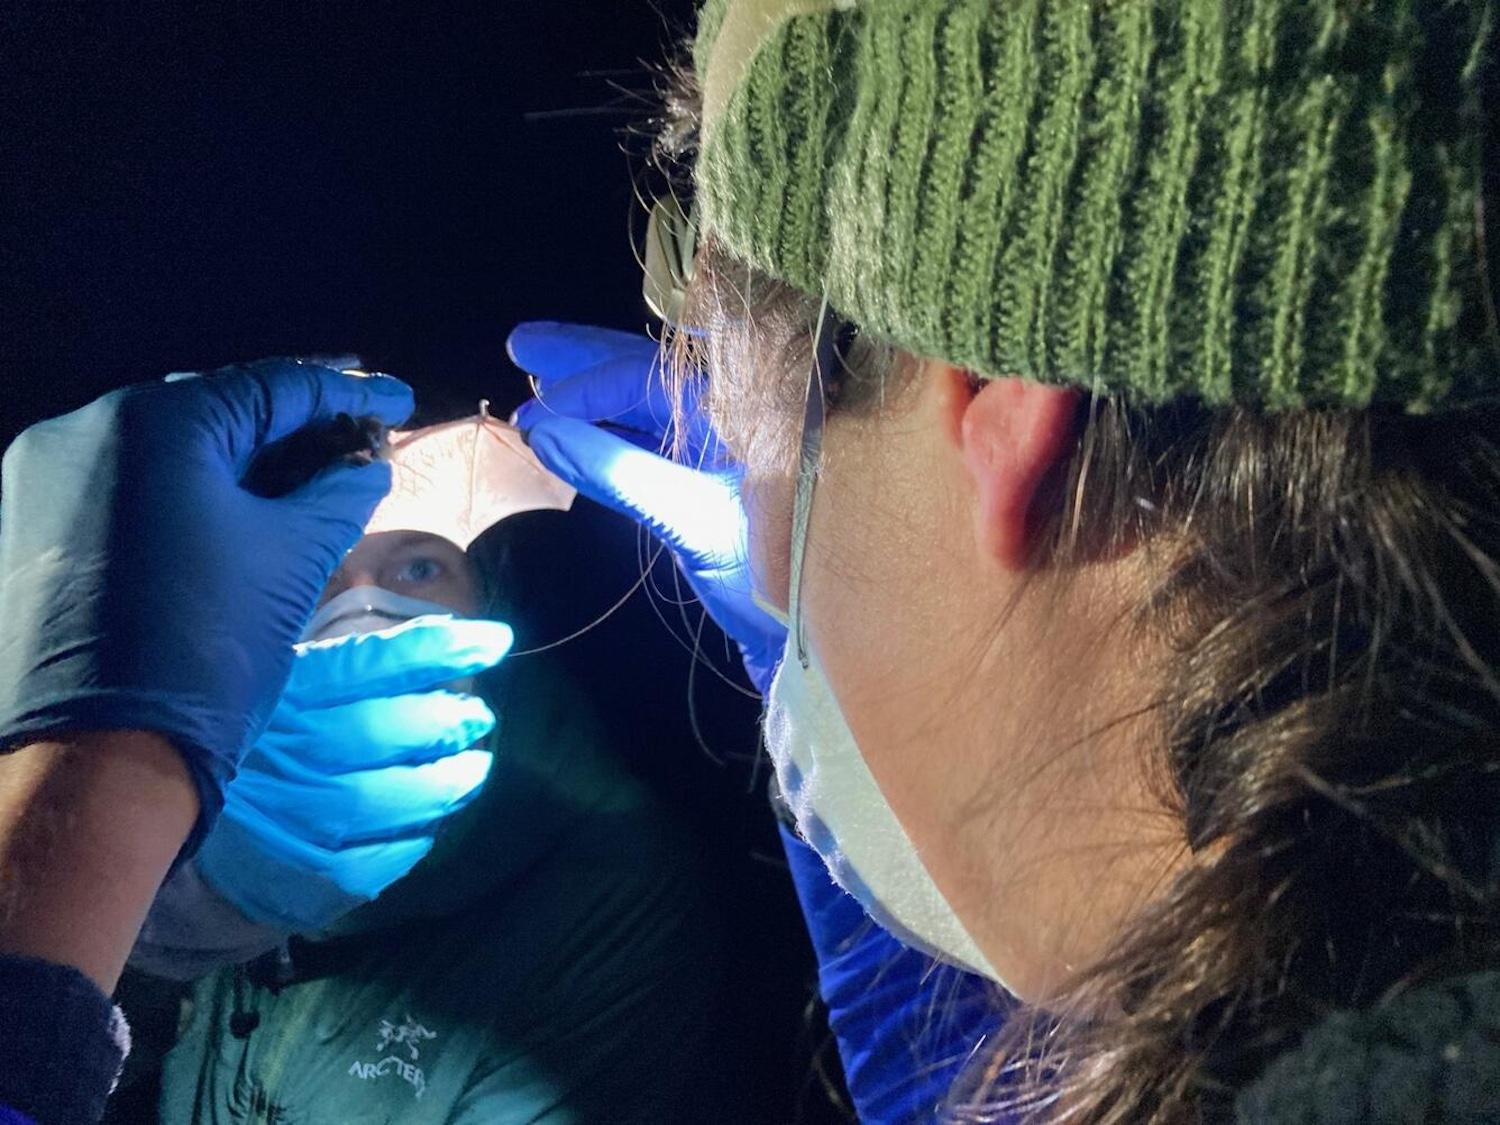 Researchers examine a bat wing while in the process of capturing bats to attach tiny Motus radio tags to track their movements.